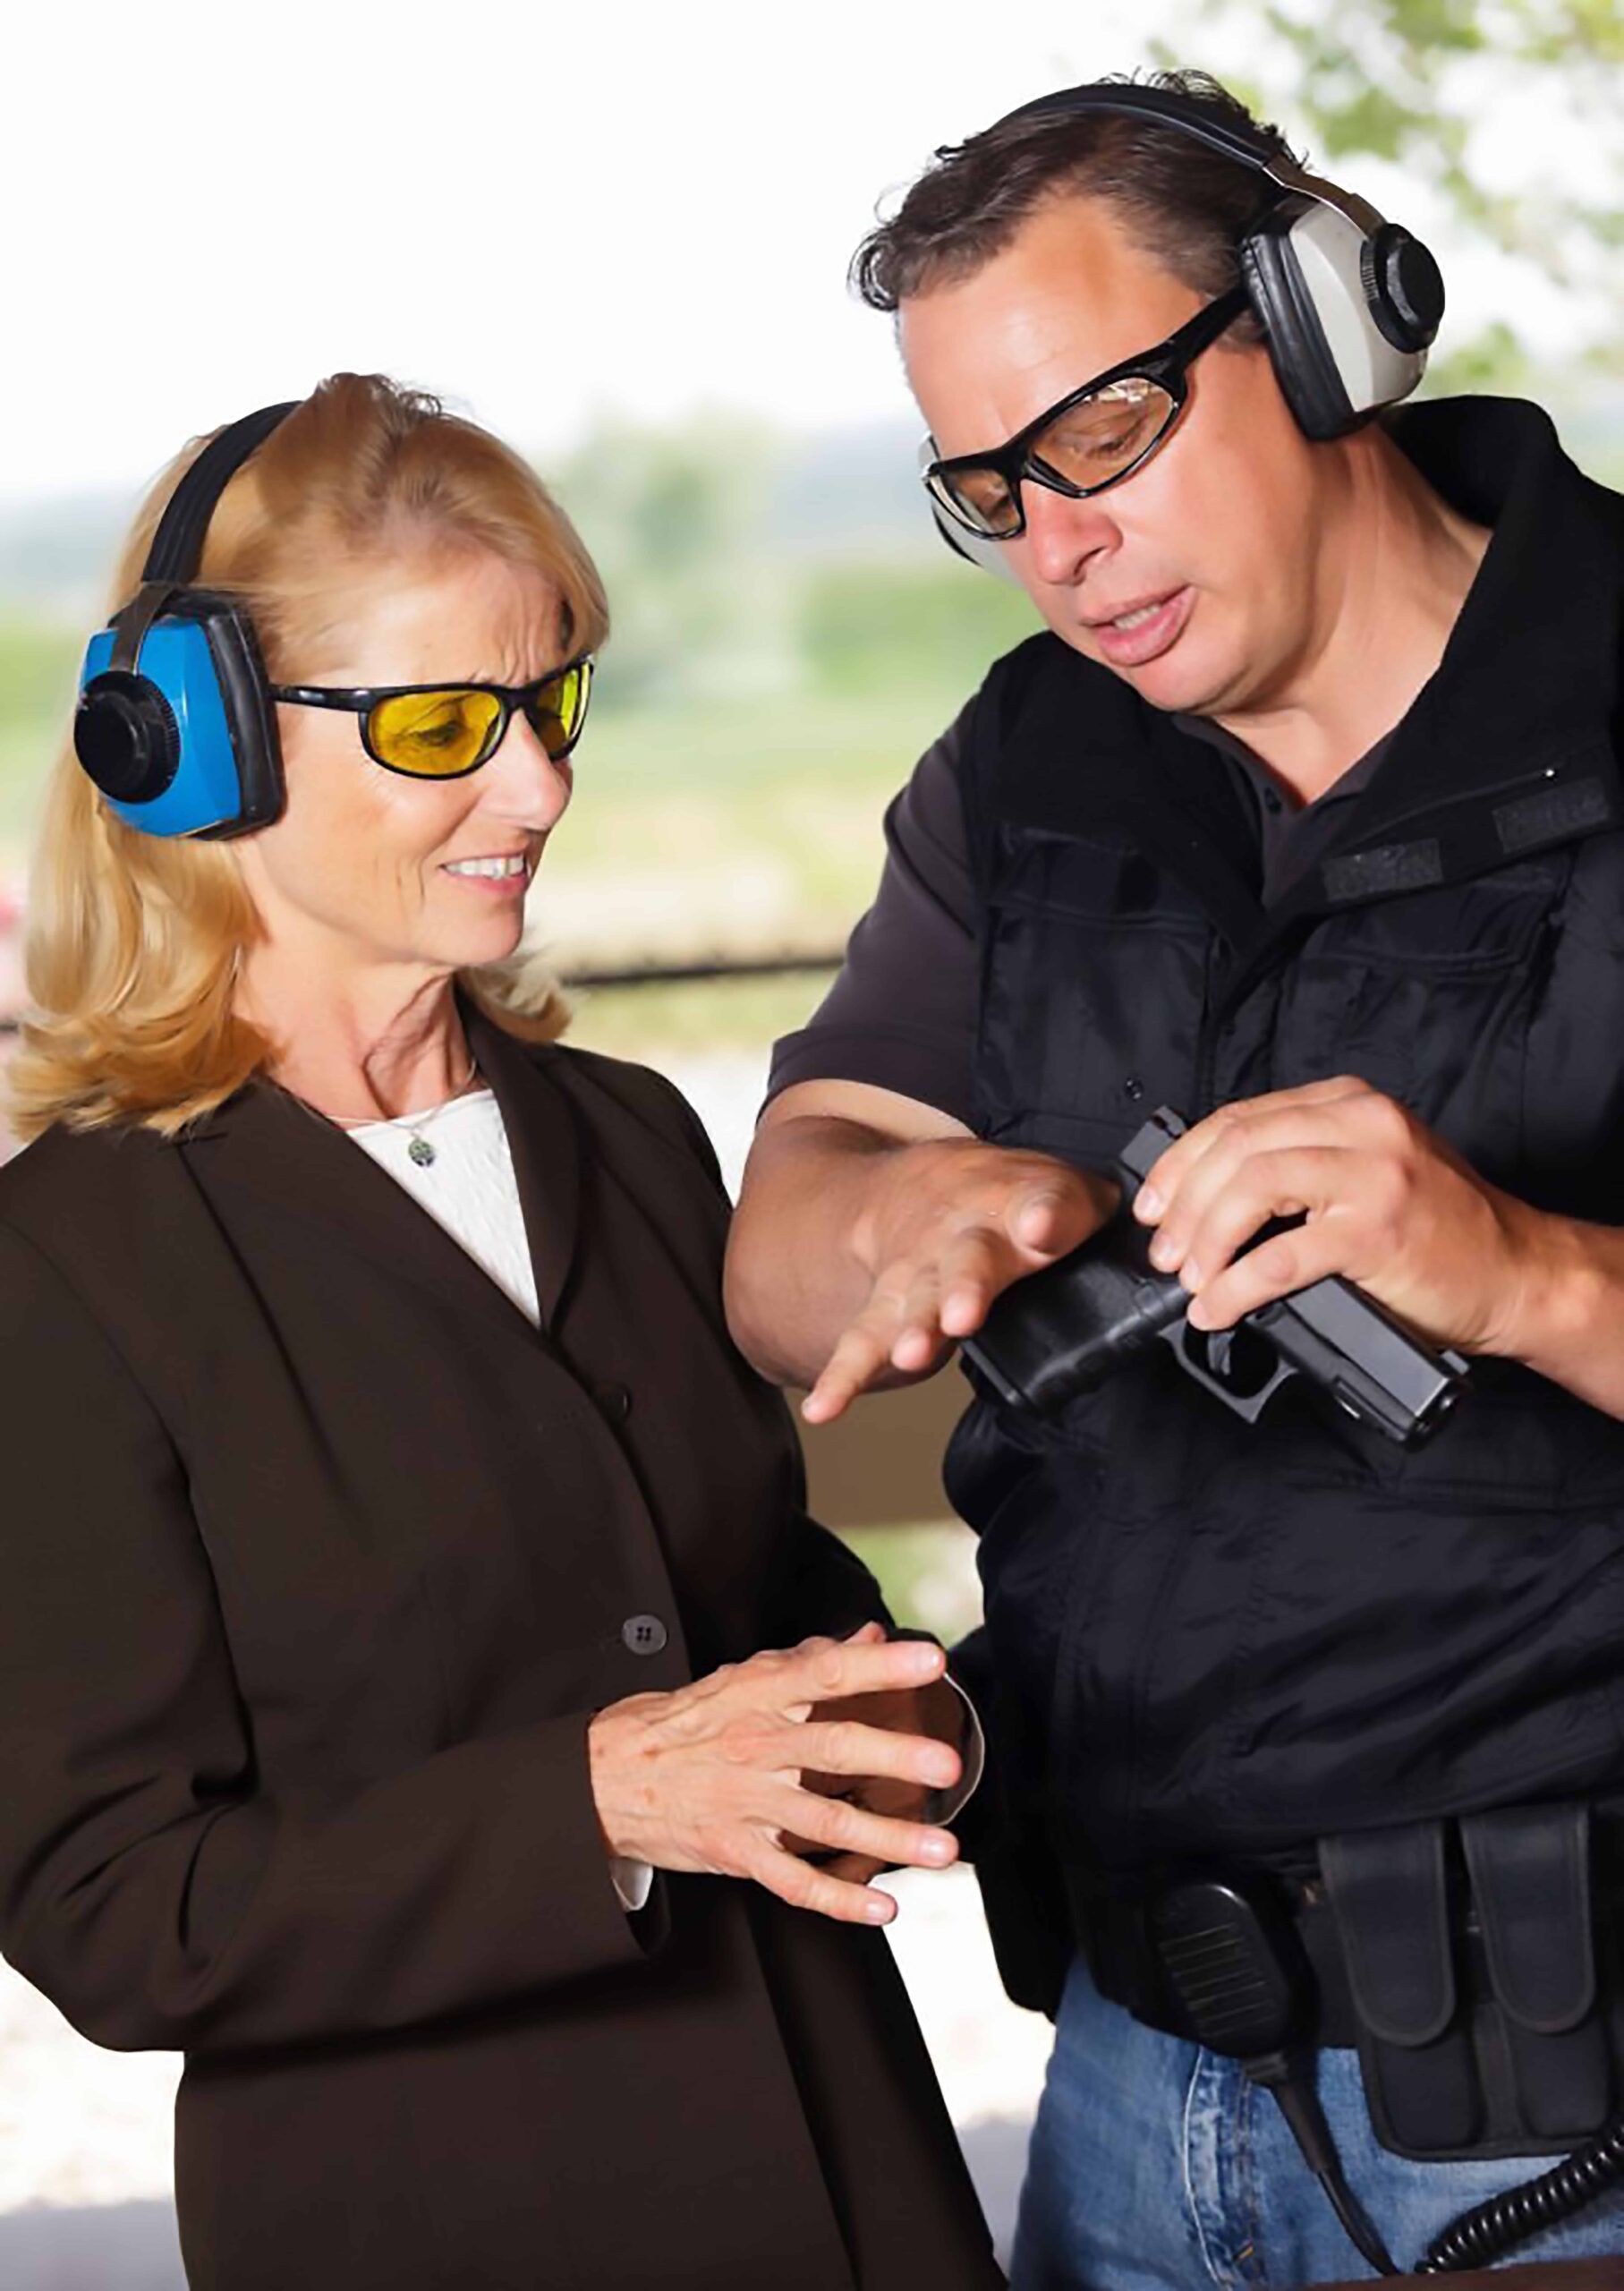 The Contents of a Good Concealed Carry Course - License to Carry Texas - Concealed Carry Texas